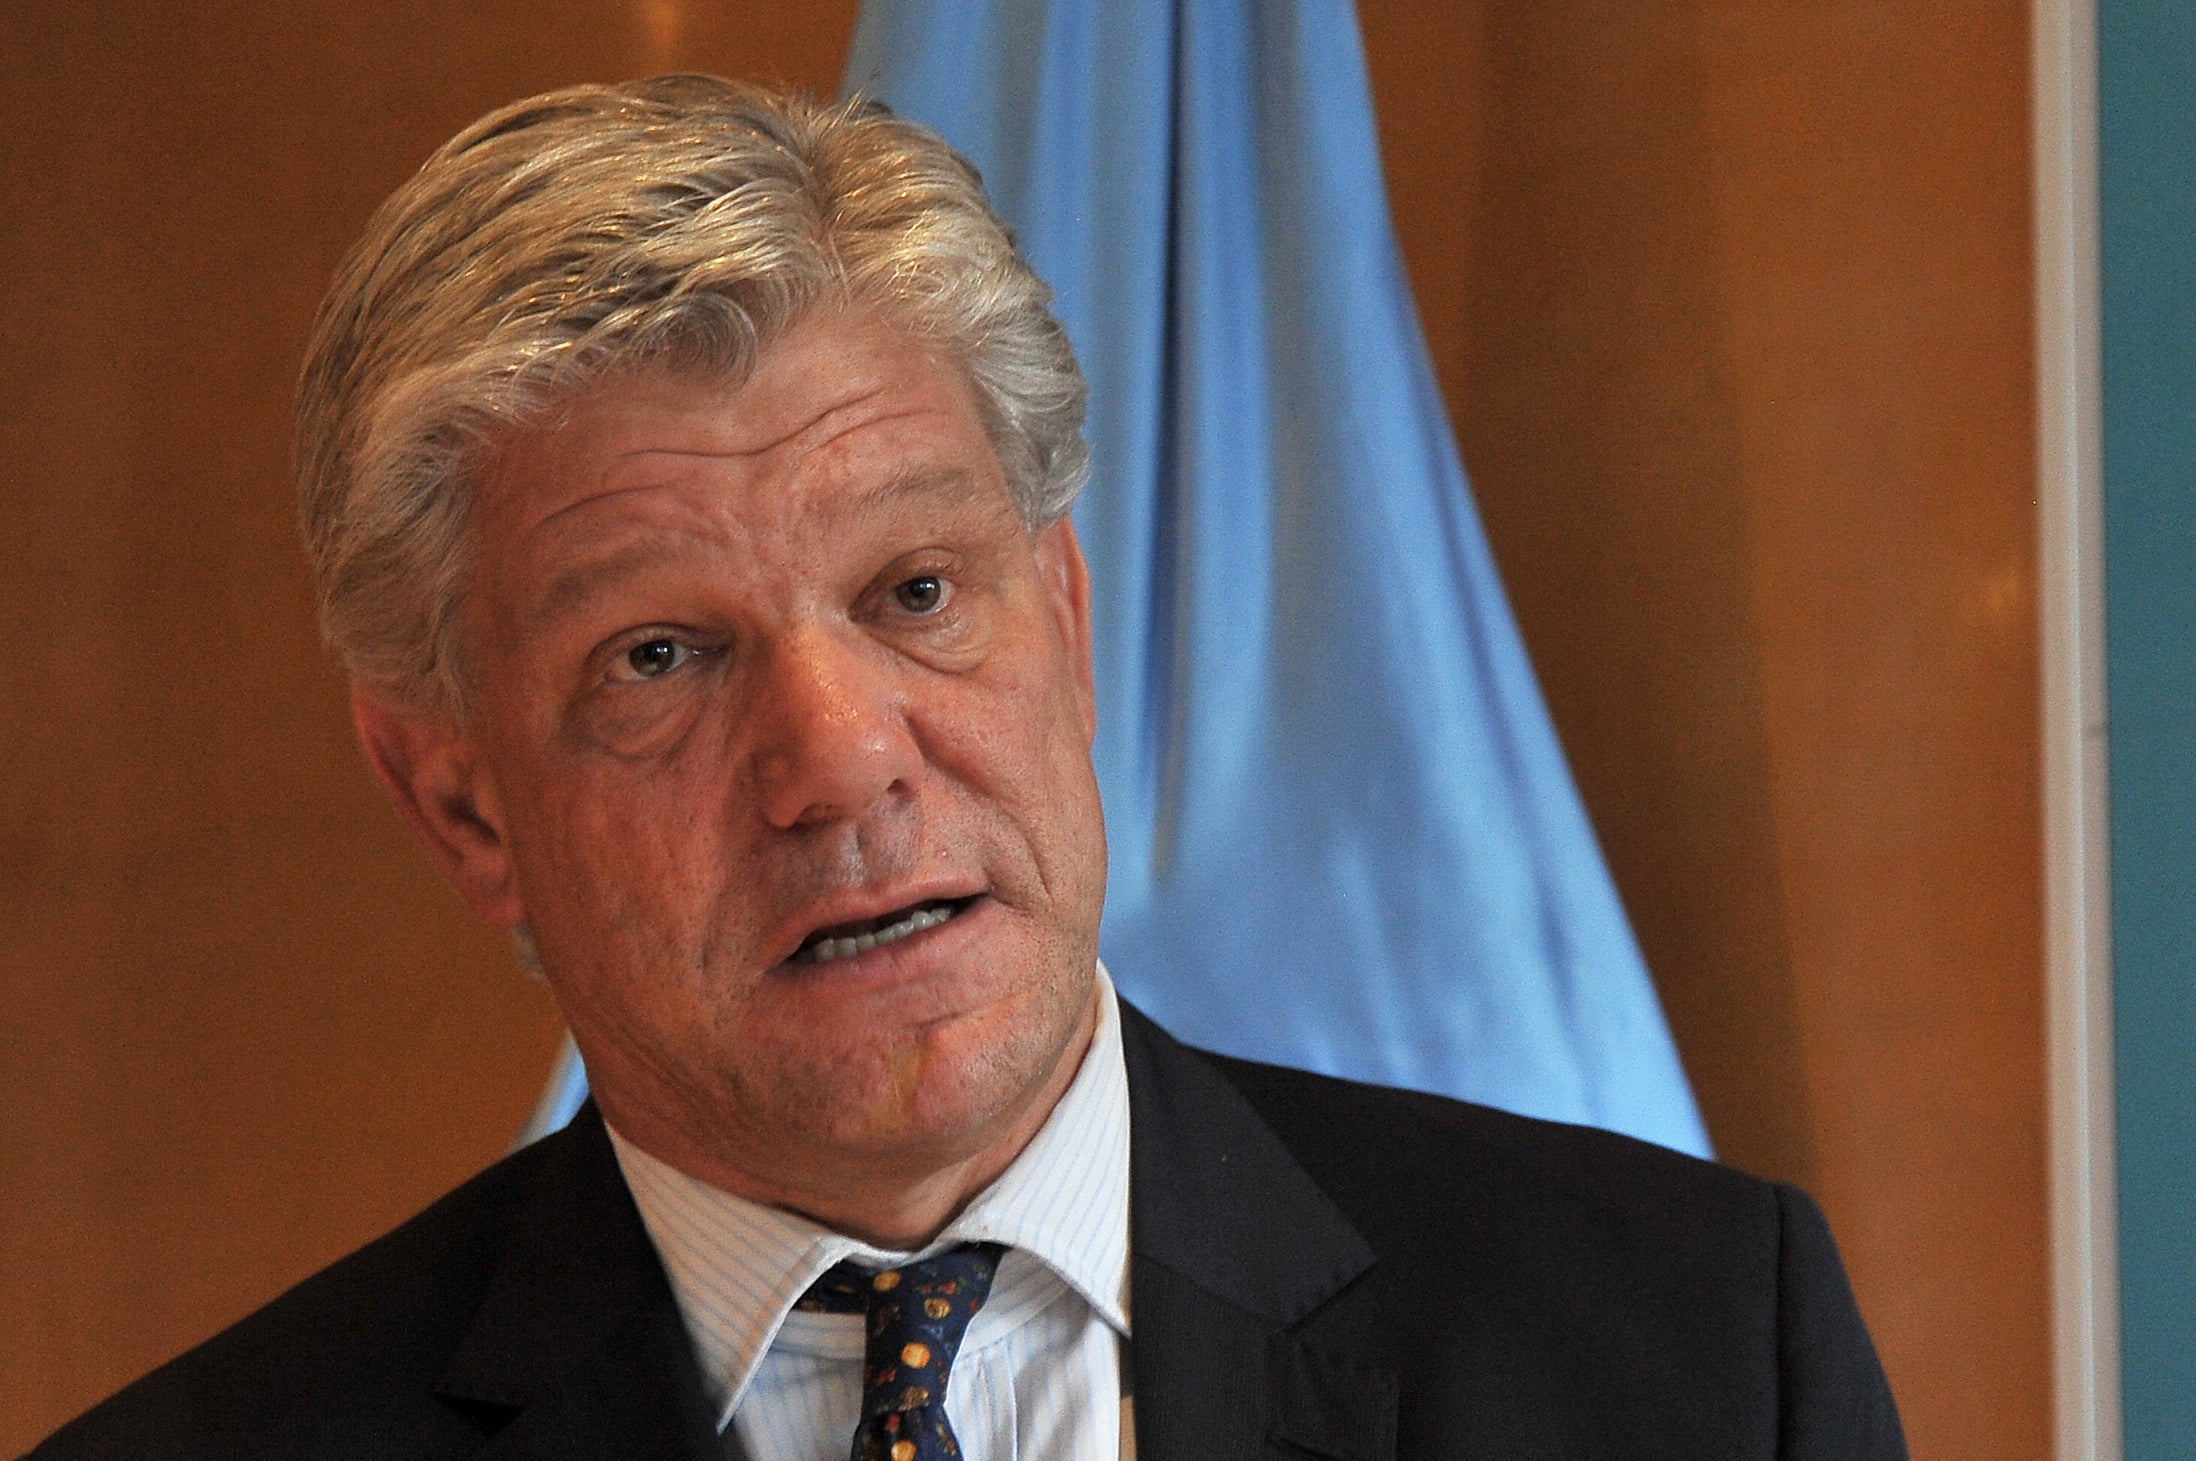 Fabrizio Hochschild speaks to AFP in Bogota on February 24, 2016. The newly named UN envoy on technology has been placed on administrative leave over allegations of sexual harassment that have been made against him.